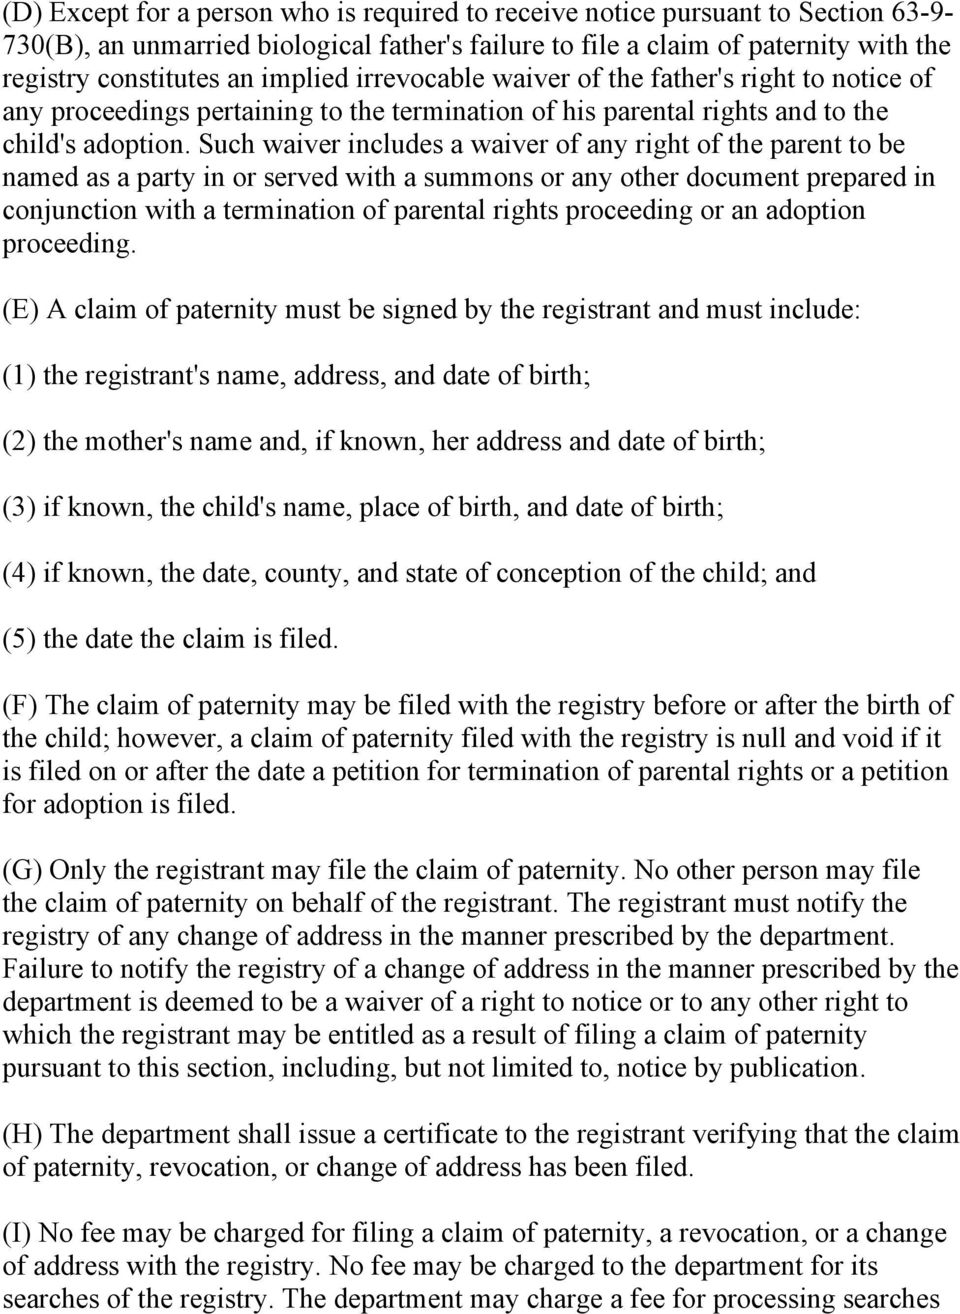 Such waiver includes a waiver of any right of the parent to be named as a party in or served with a summons or any other document prepared in conjunction with a termination of parental rights